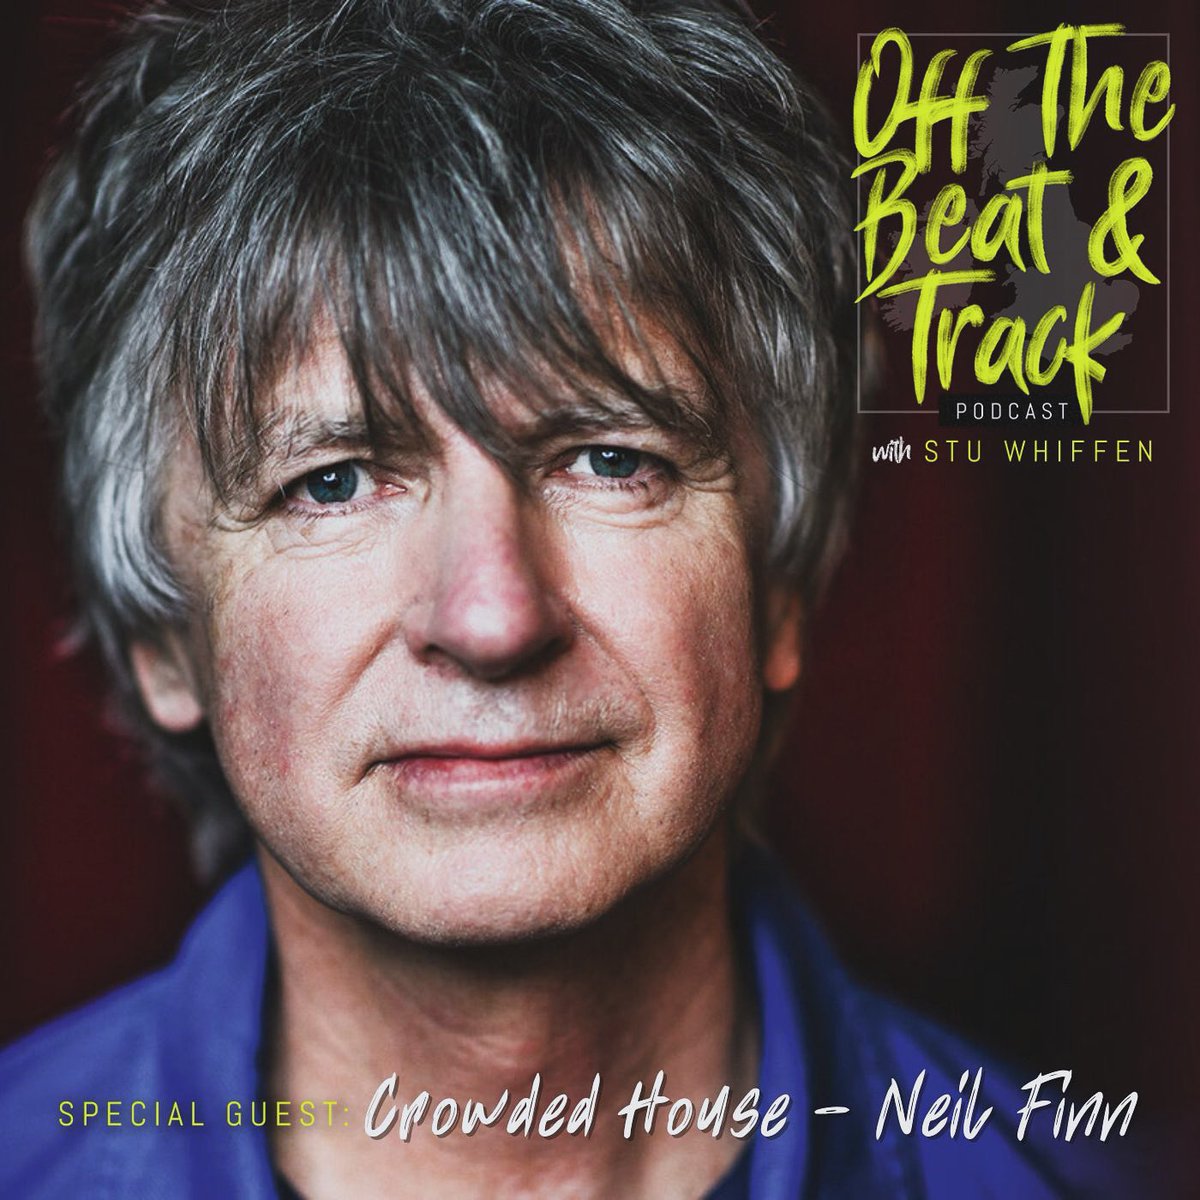 EPISODE 500 is out NOW! I’m so thrilled to share this @beatandtrackpod episode as I got to sit and chat to the absolute legend that is Neil Finn of @CrowdedHouseHQ Listen here open.spotify.com/episode/0A6vLk… #crowdedhouse #neilfinn #timfinn #nickseymour